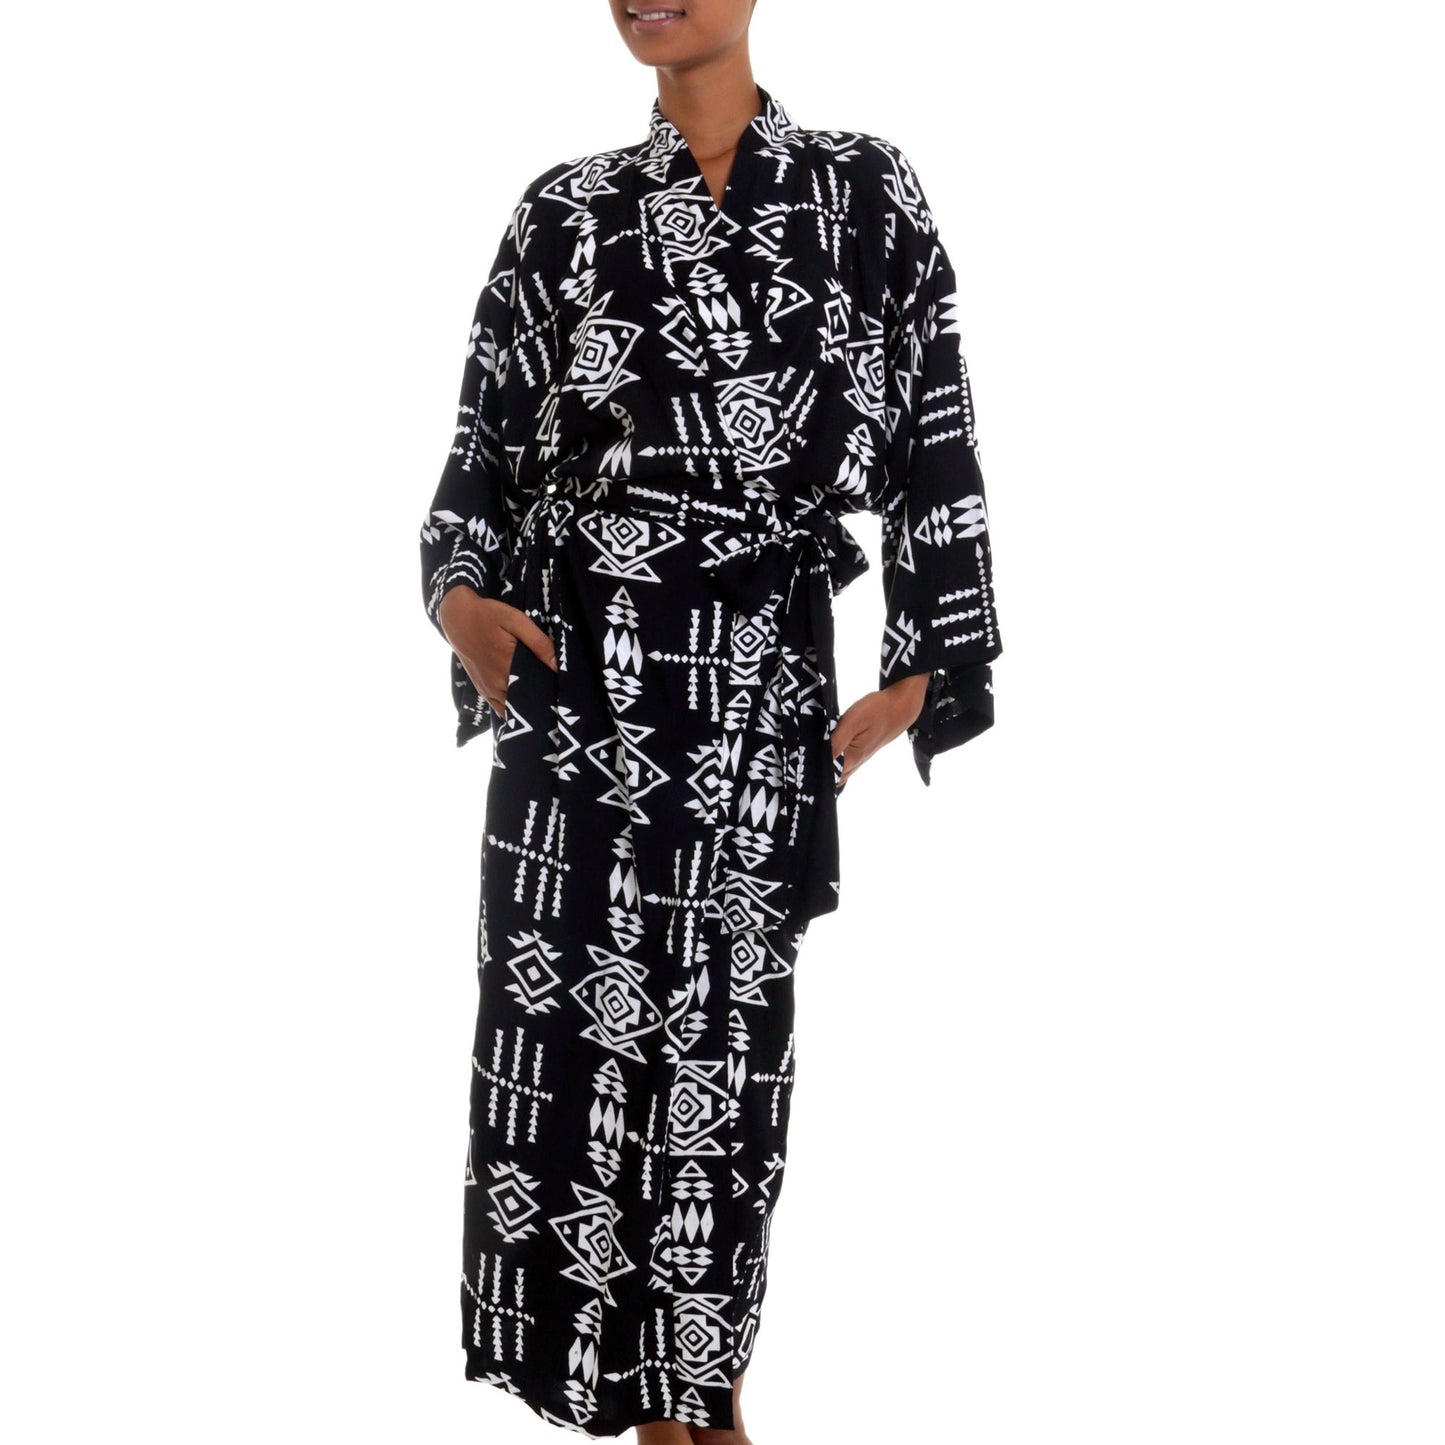 Eastern Tranquility Robe